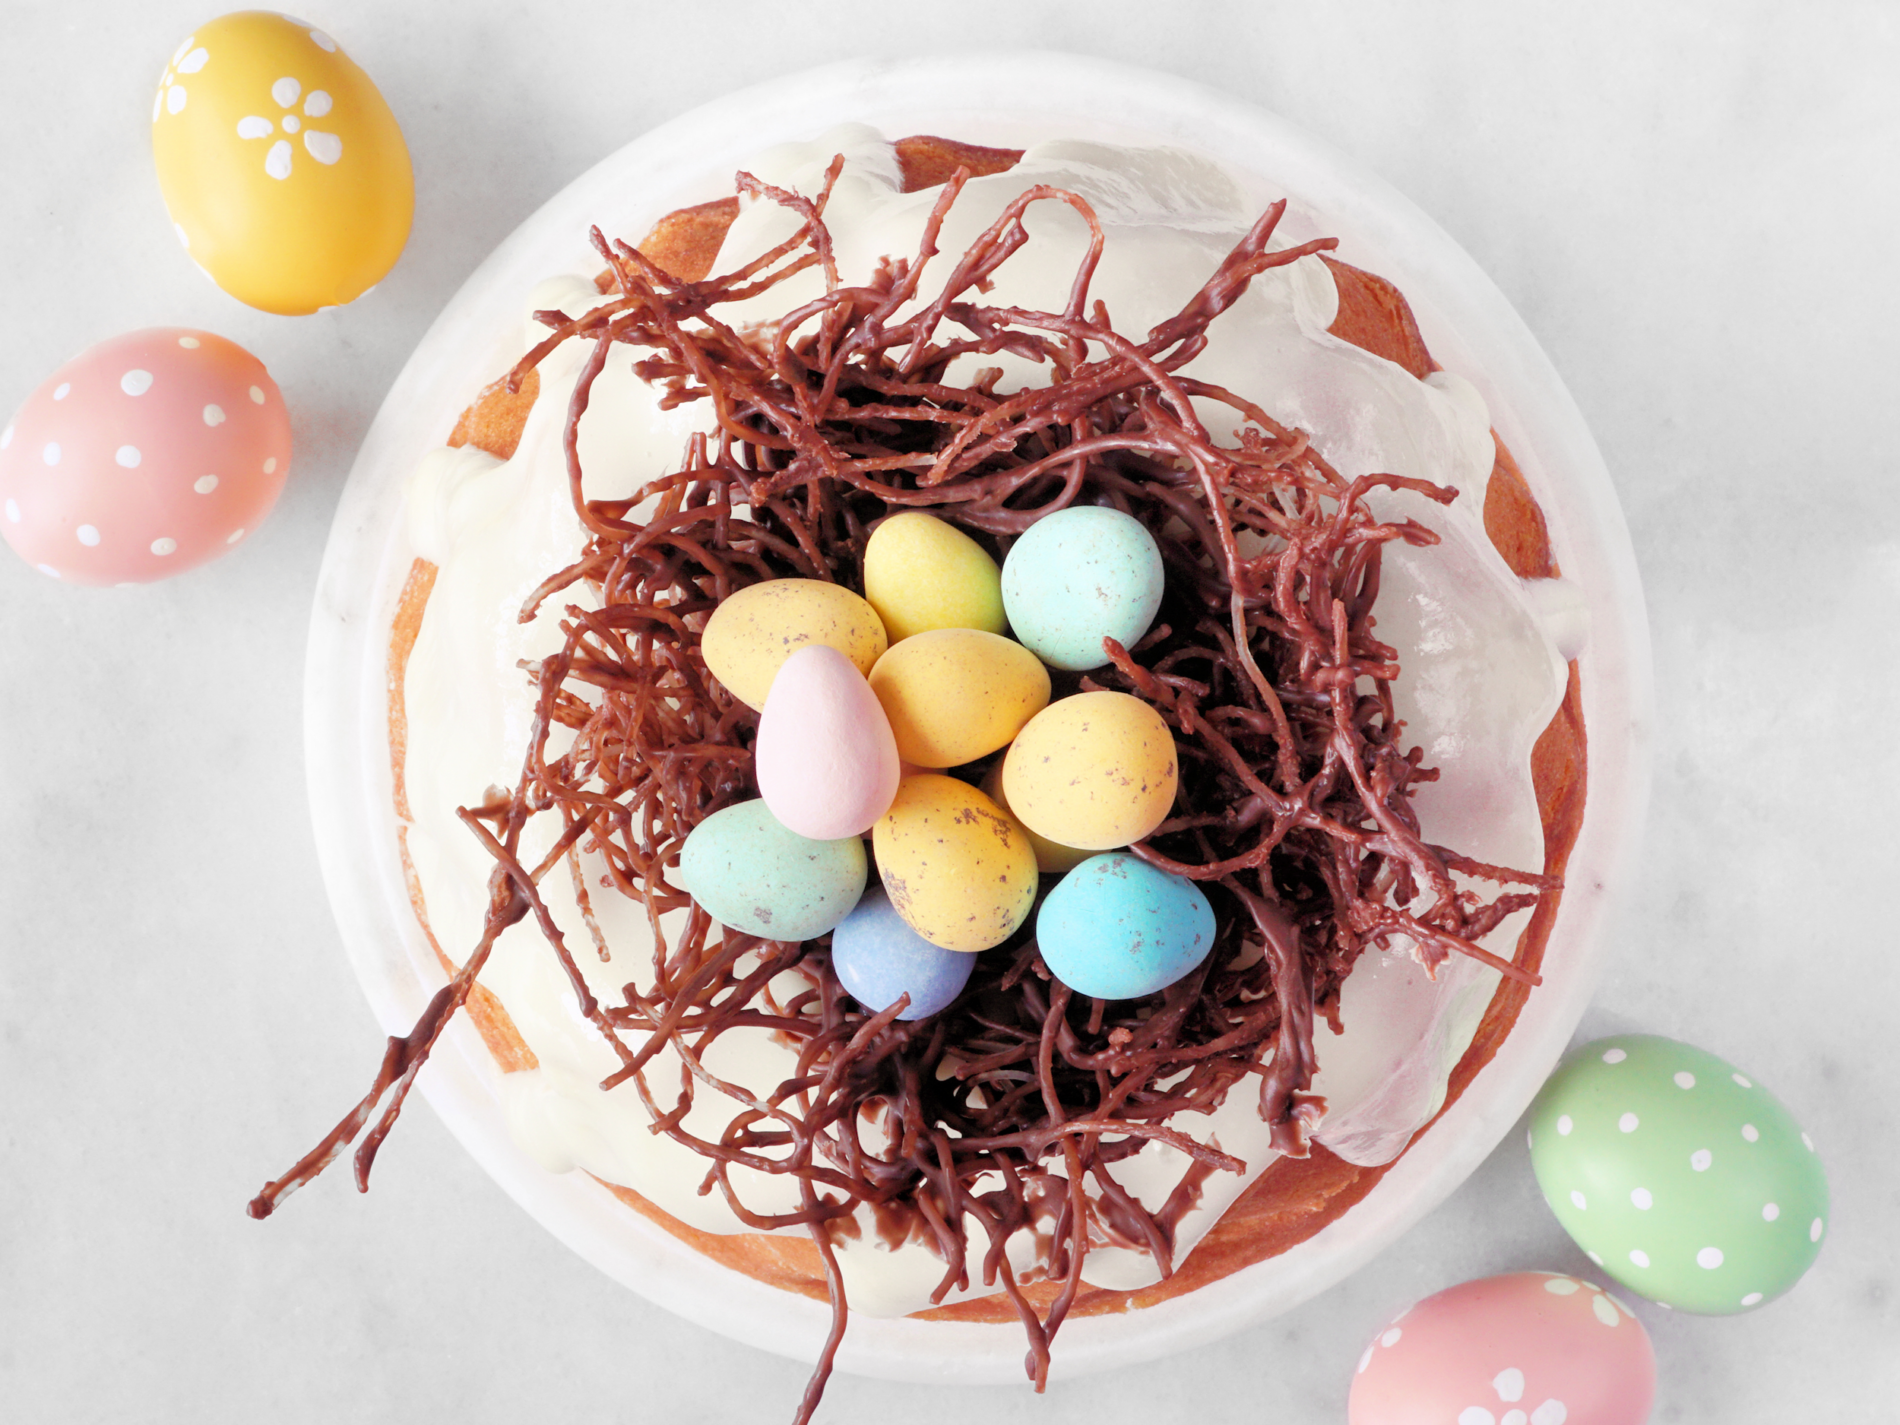 Edible chocolate Easter nest with colourful sugar eggs